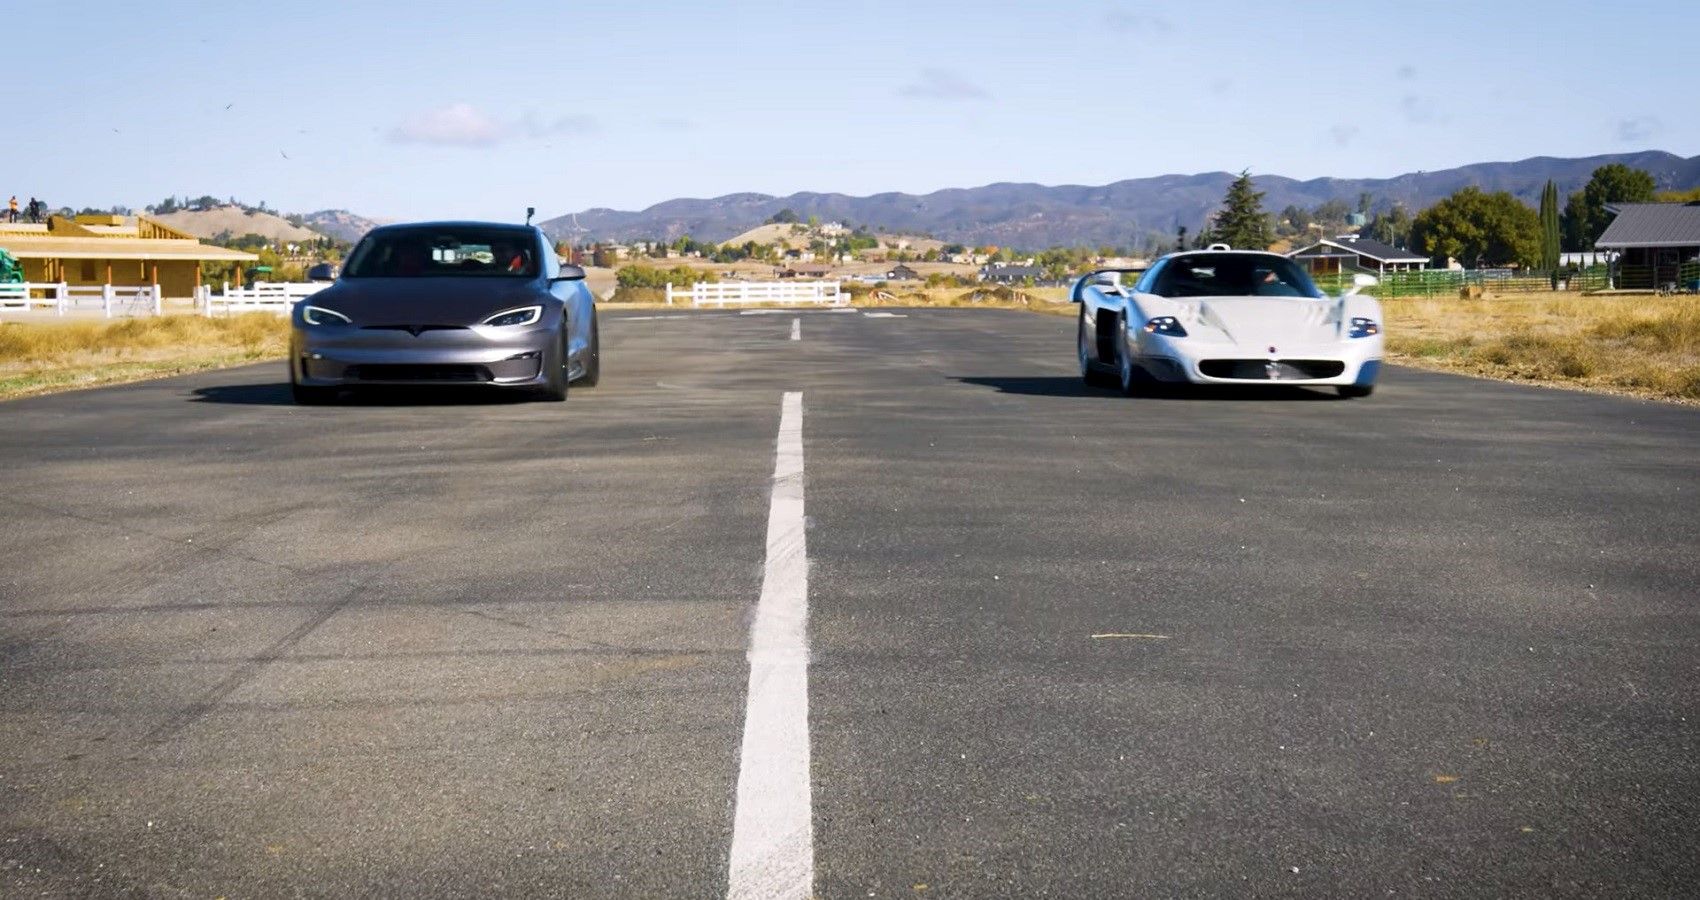 See What Happens When The Tesla Model S Goes Up Against Some Of The Fastest Legends Ever